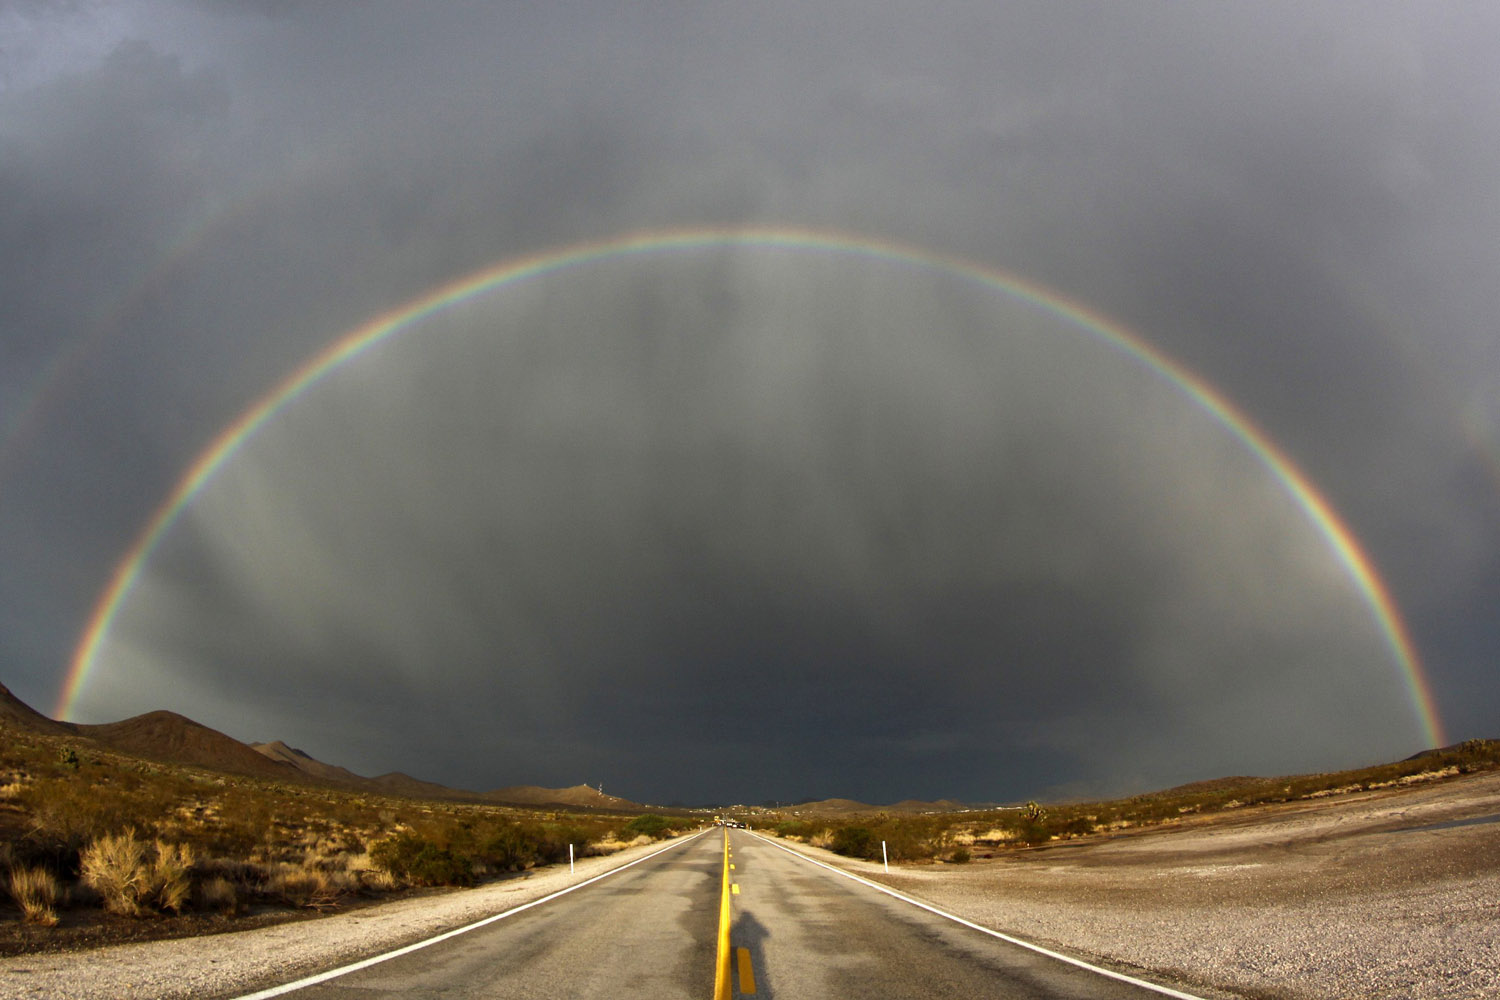 July 13, 2012. A double rainbow appears over Nipton Road in Searchlight, Nev. after heavy storms.